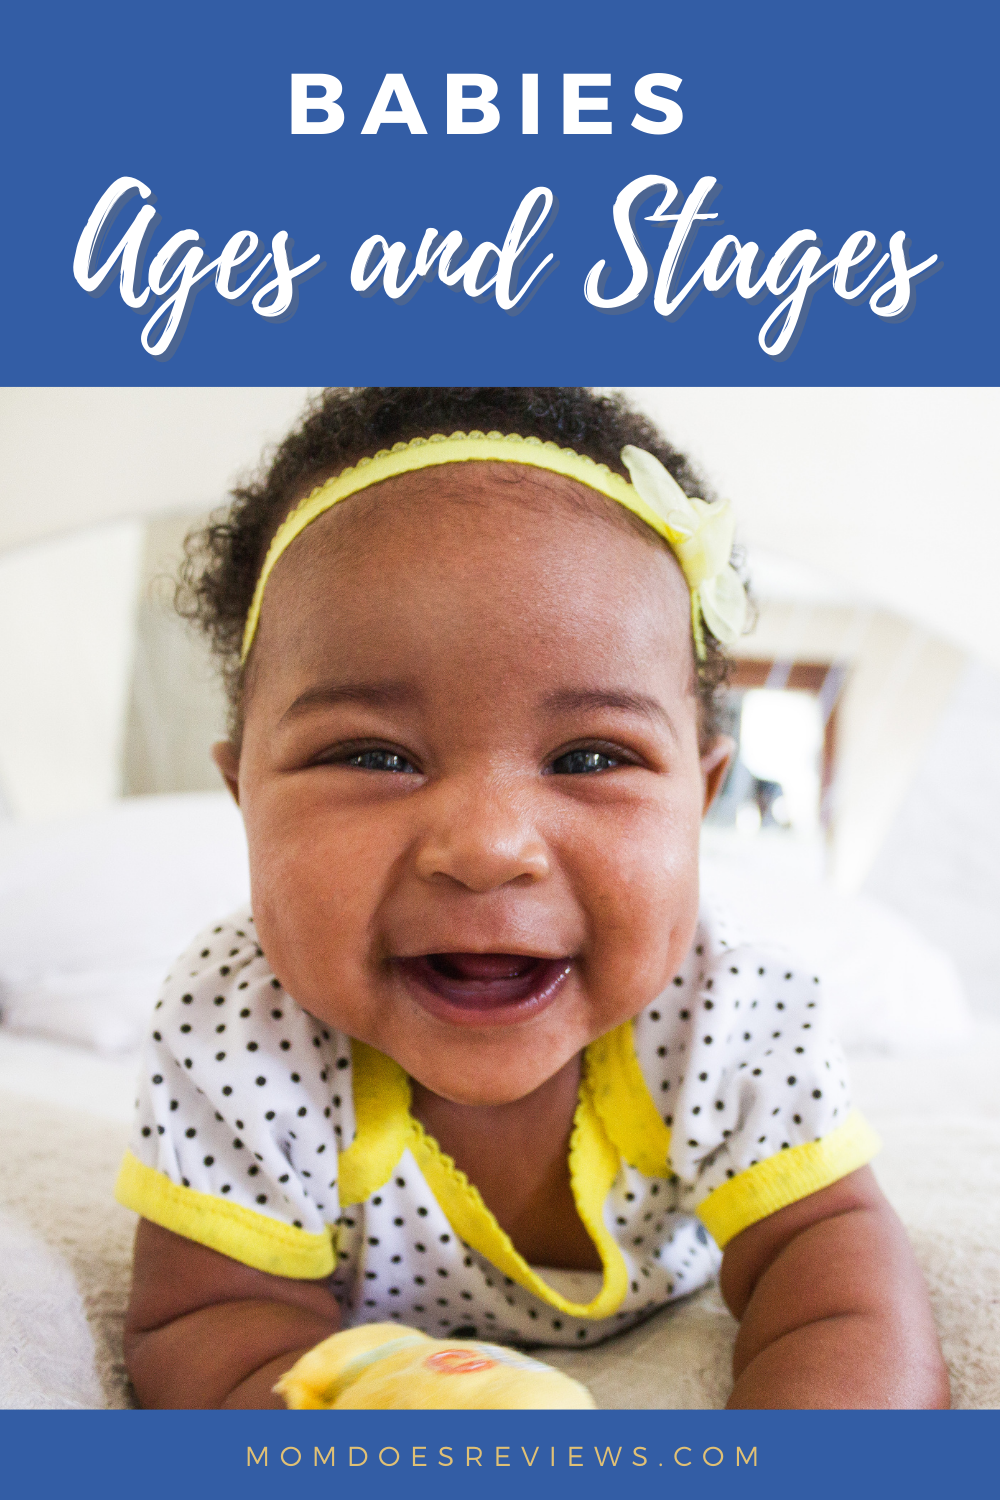 Baby’s Ages and Stages: Know When to Fuss